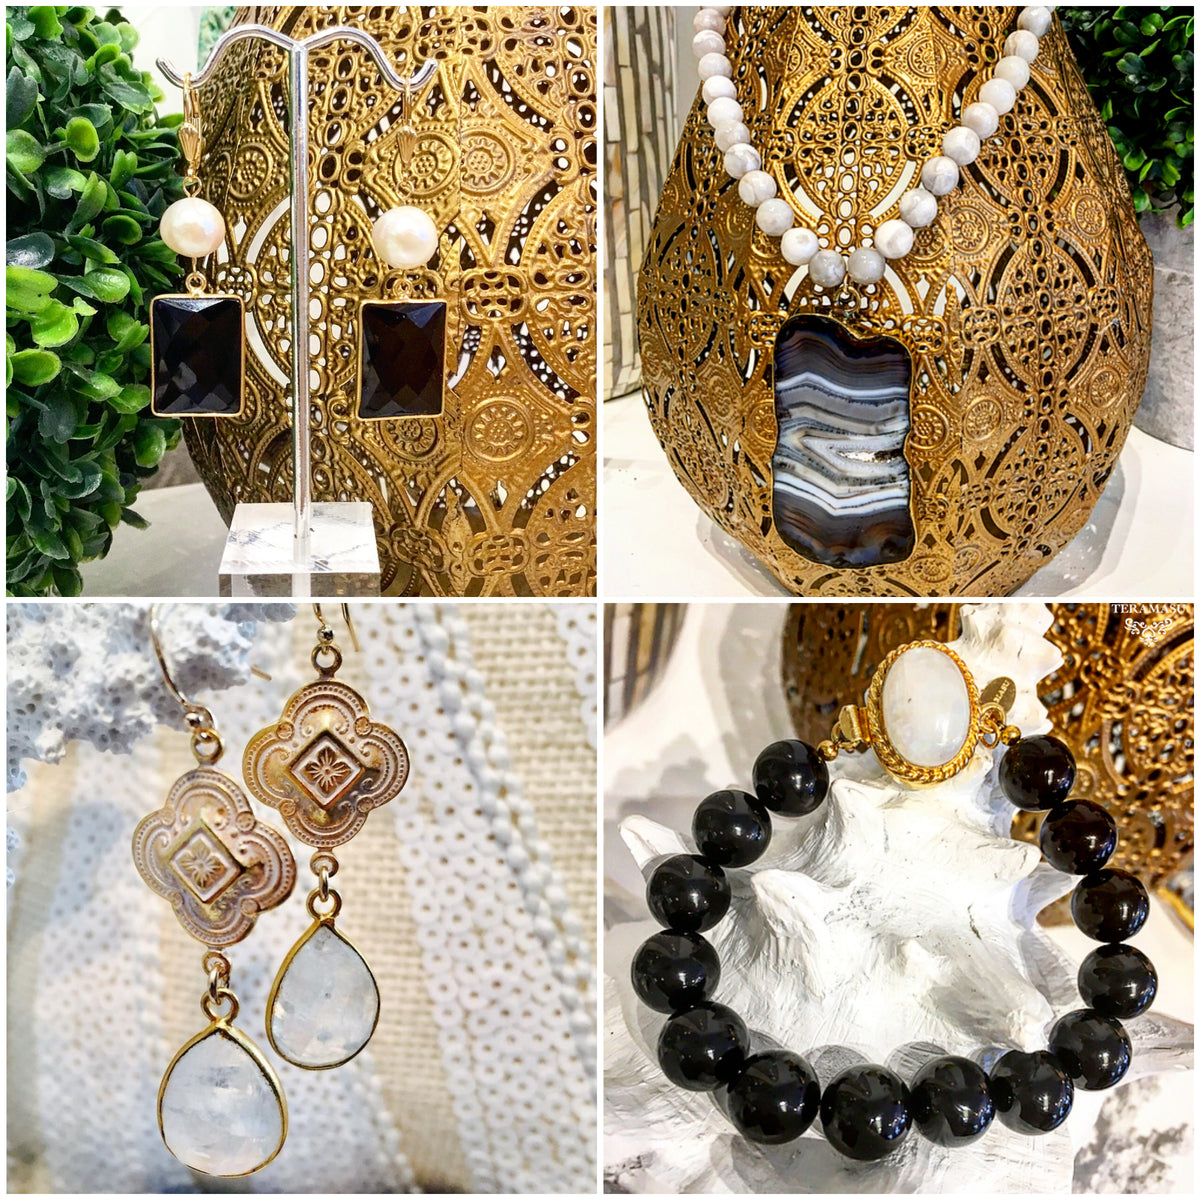 Chic Peek: Gorgeous Black & White Statement Jewelry Inspiration for Your Fall Style from Teramasu